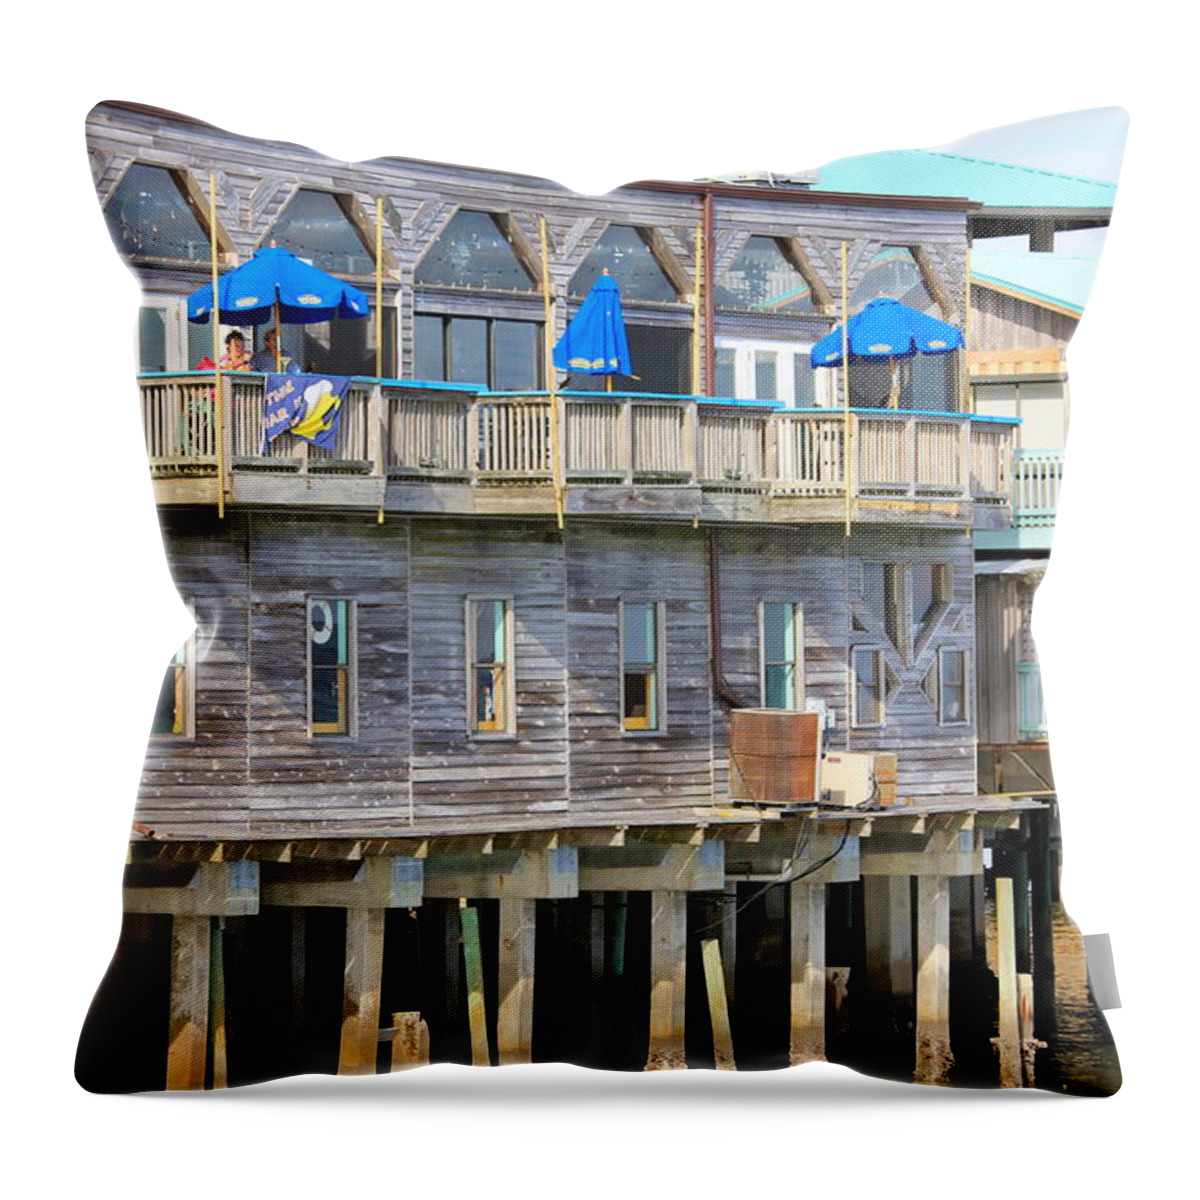 Restaurant Along The Sea Throw Pillow featuring the photograph Building on Piles Above Water by Lorna Maza